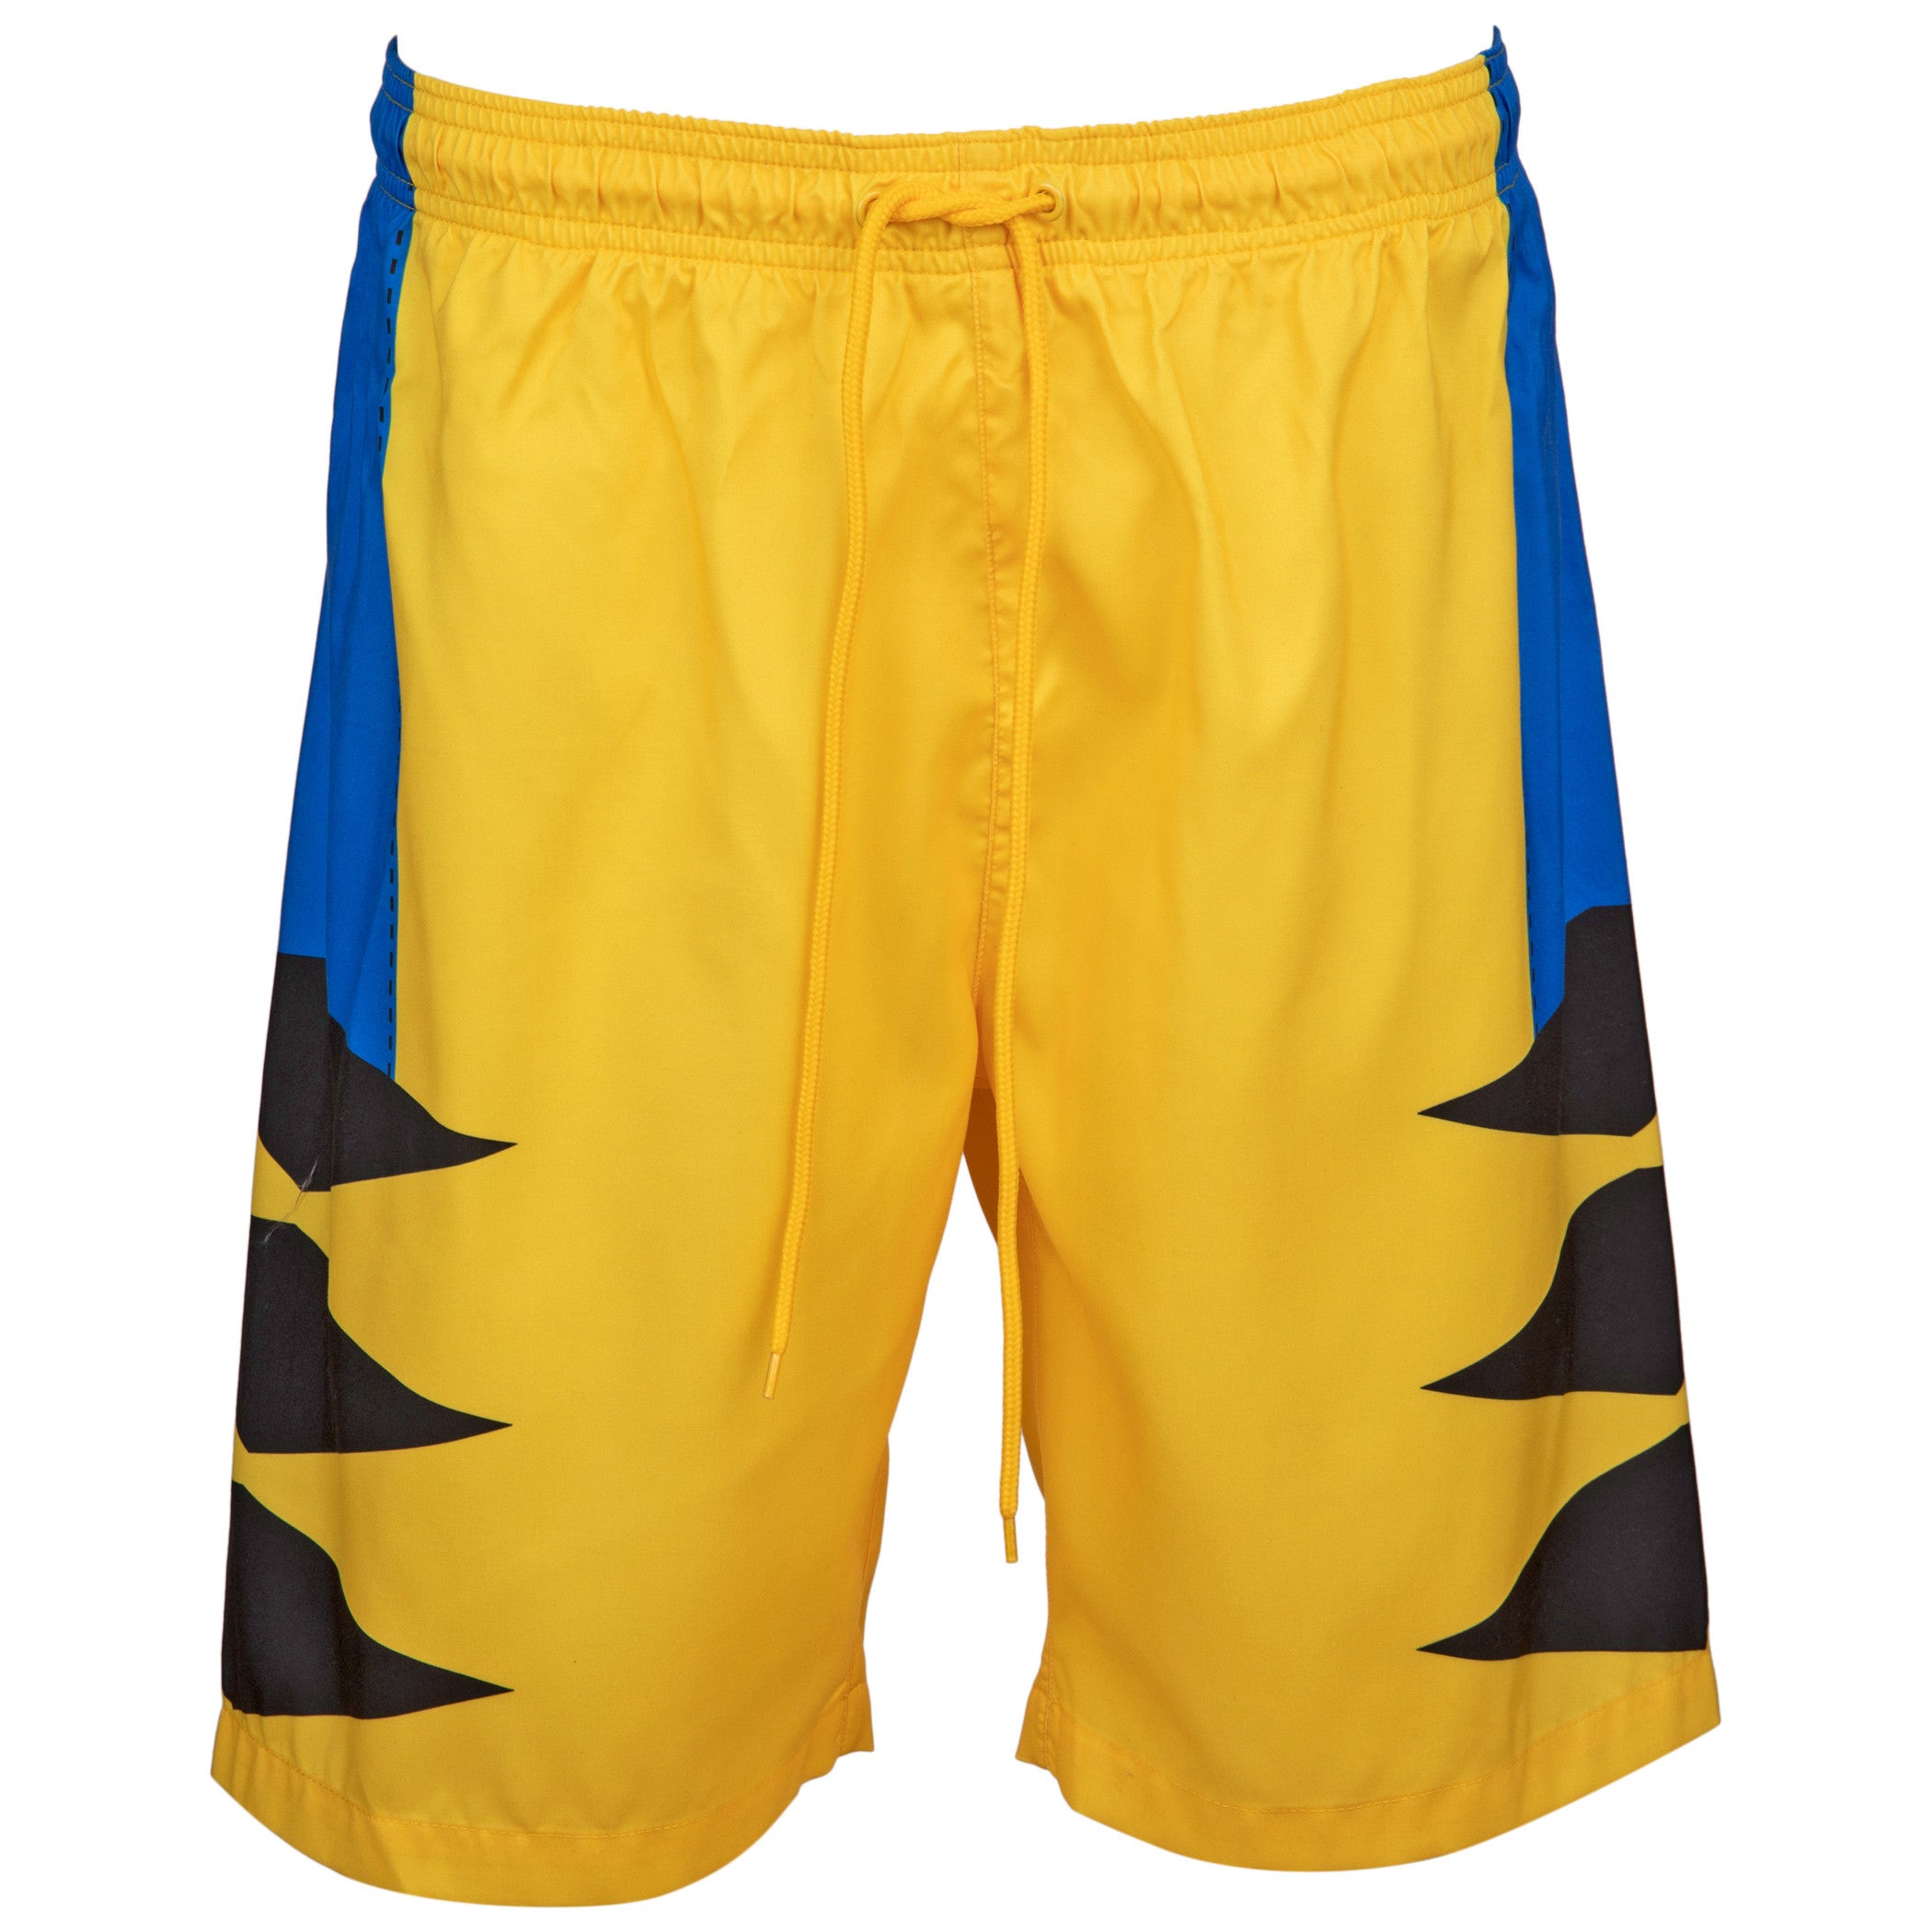 X-Men's Wolverine Character Costume Board Shorts – yellowboxcollectables